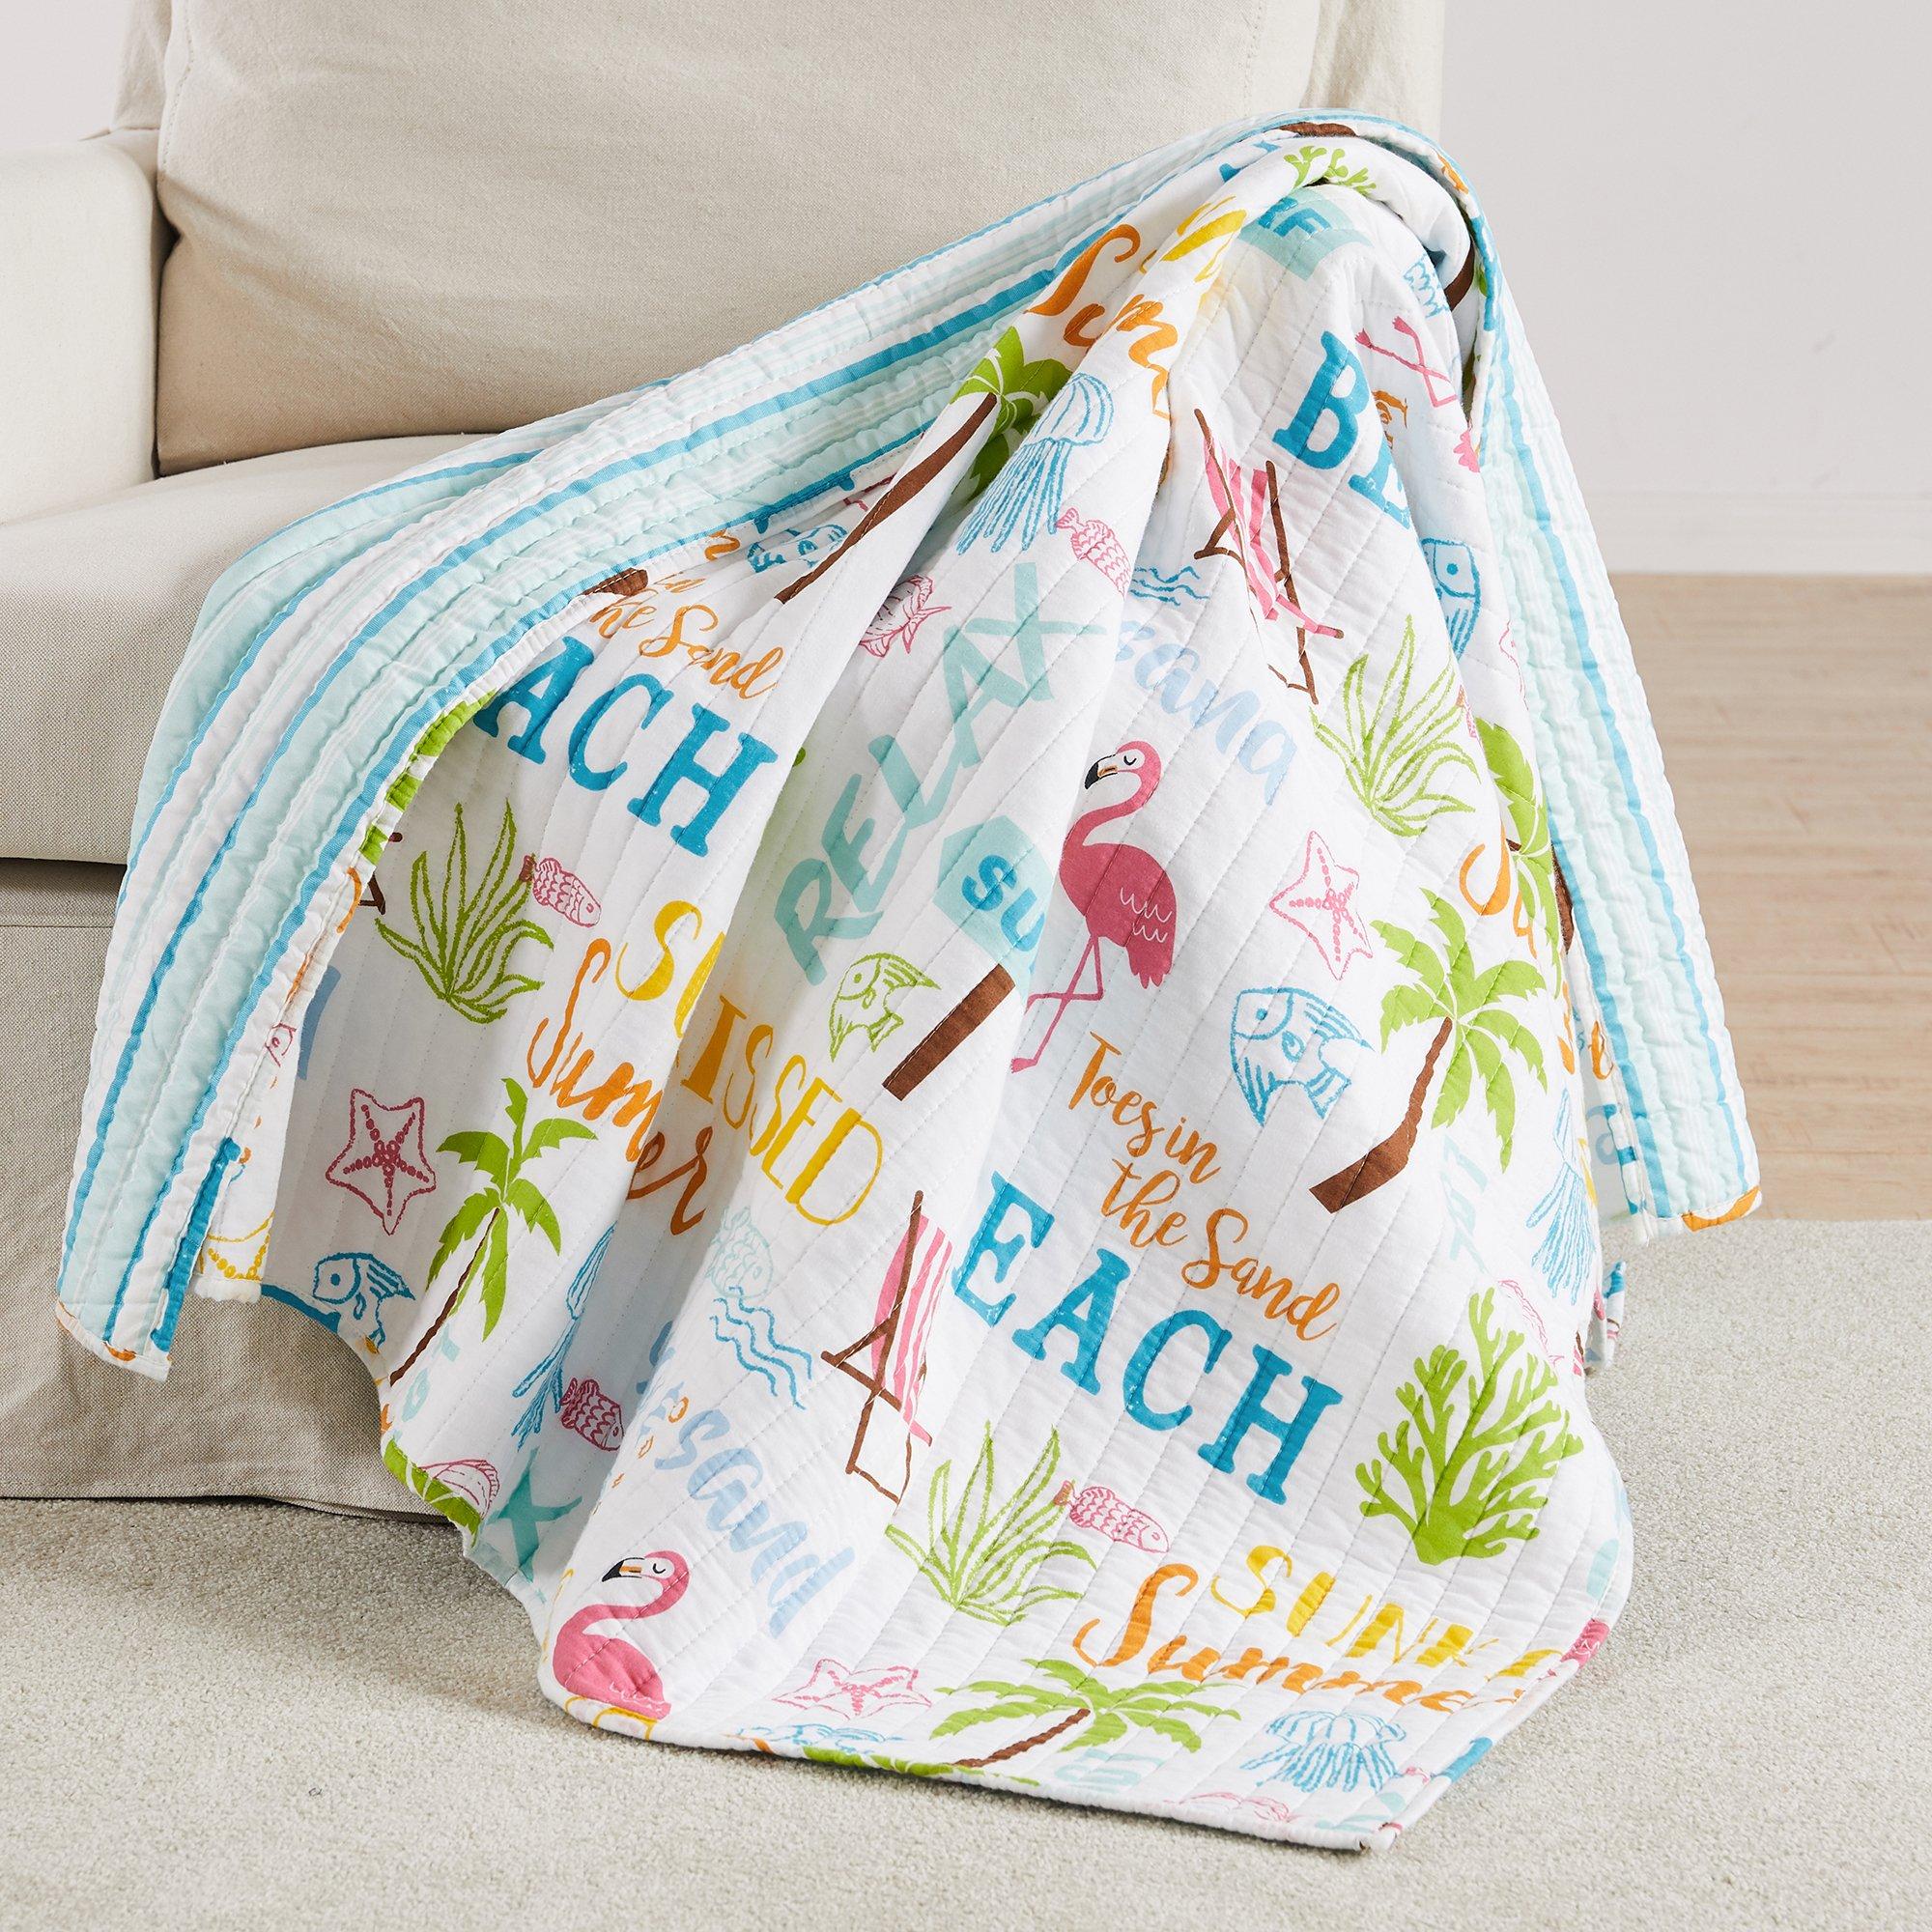 Coastal Beach Days Quilted Reversible Throw